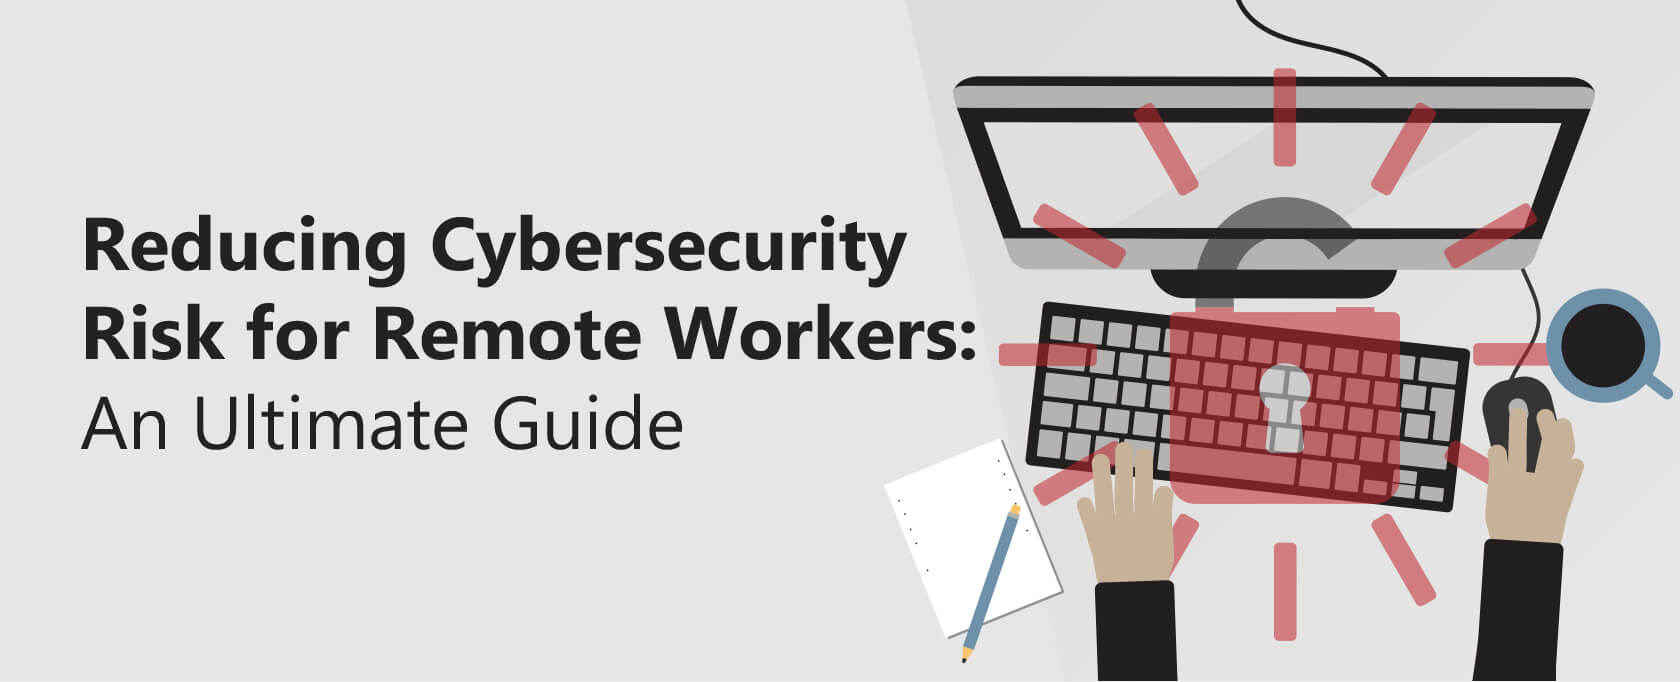 Reducing Cybersecurity Risk for Remote Workers